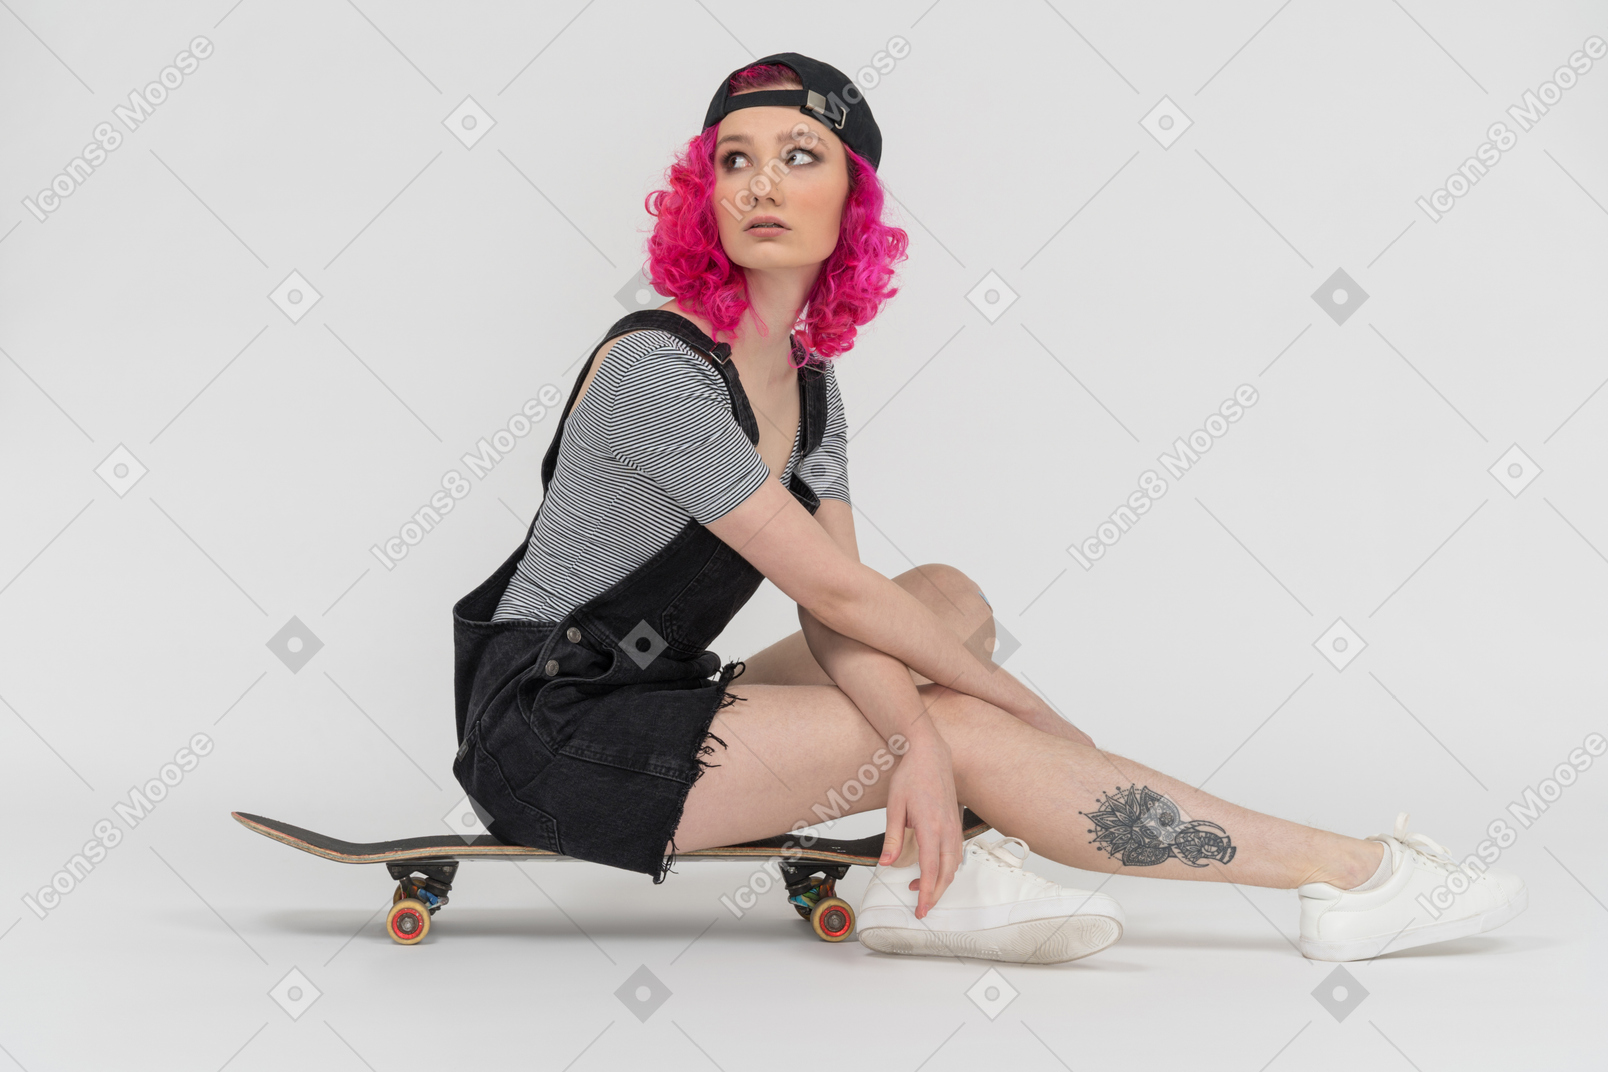 A pink haired girl sitting on a skateboard